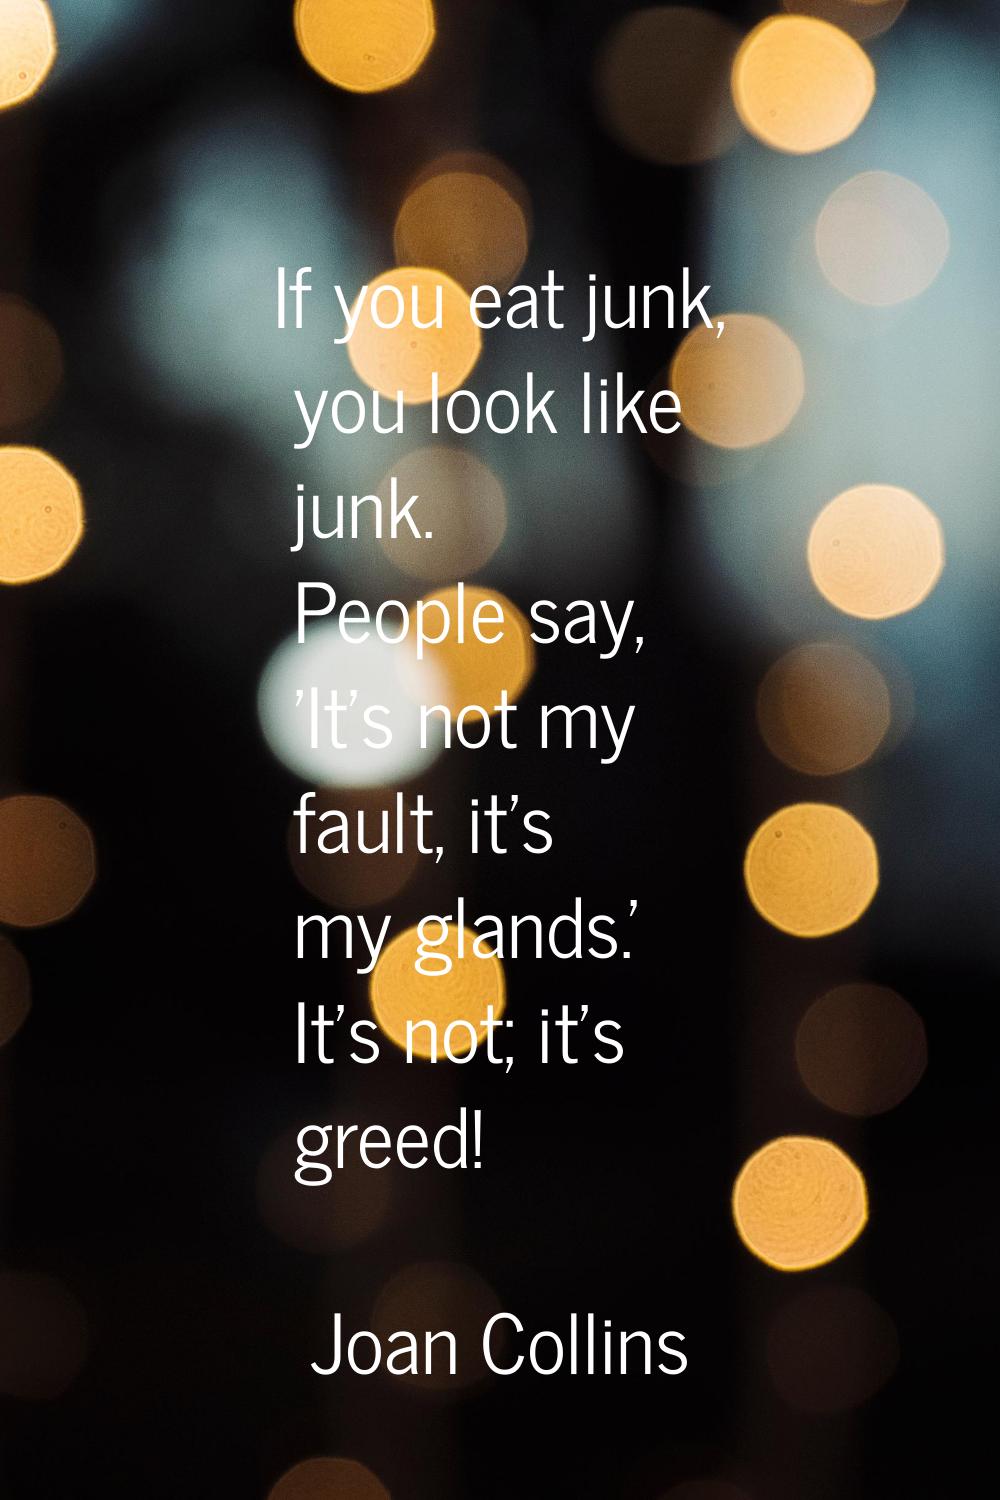 If you eat junk, you look like junk. People say, 'It's not my fault, it's my glands.' It's not; it'